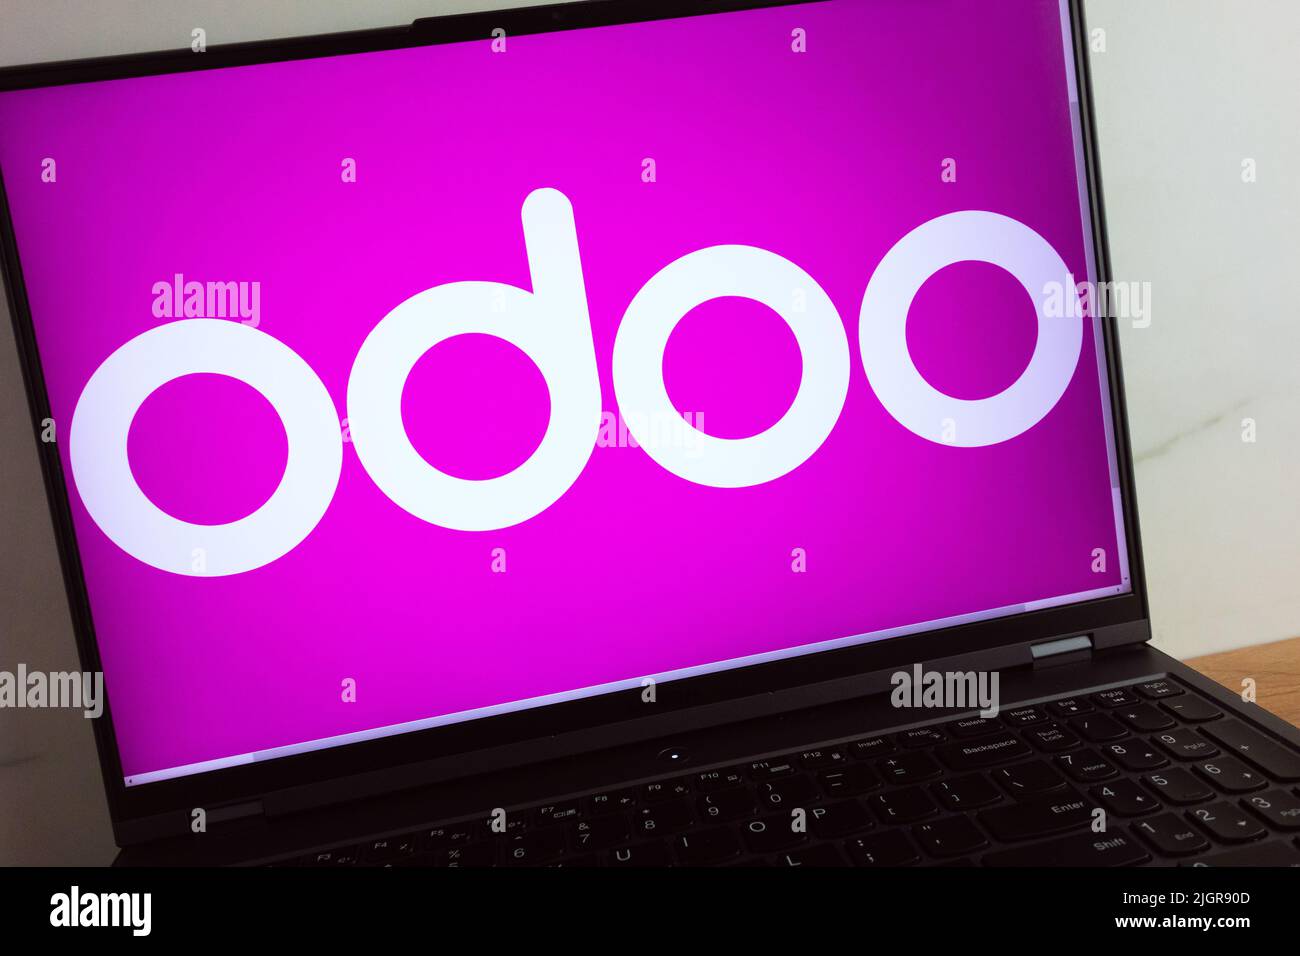 KONSKIE, POLAND - July 11, 2022: Odoo suite of business management software tools logo displayed on laptop computer screen Stock Photo